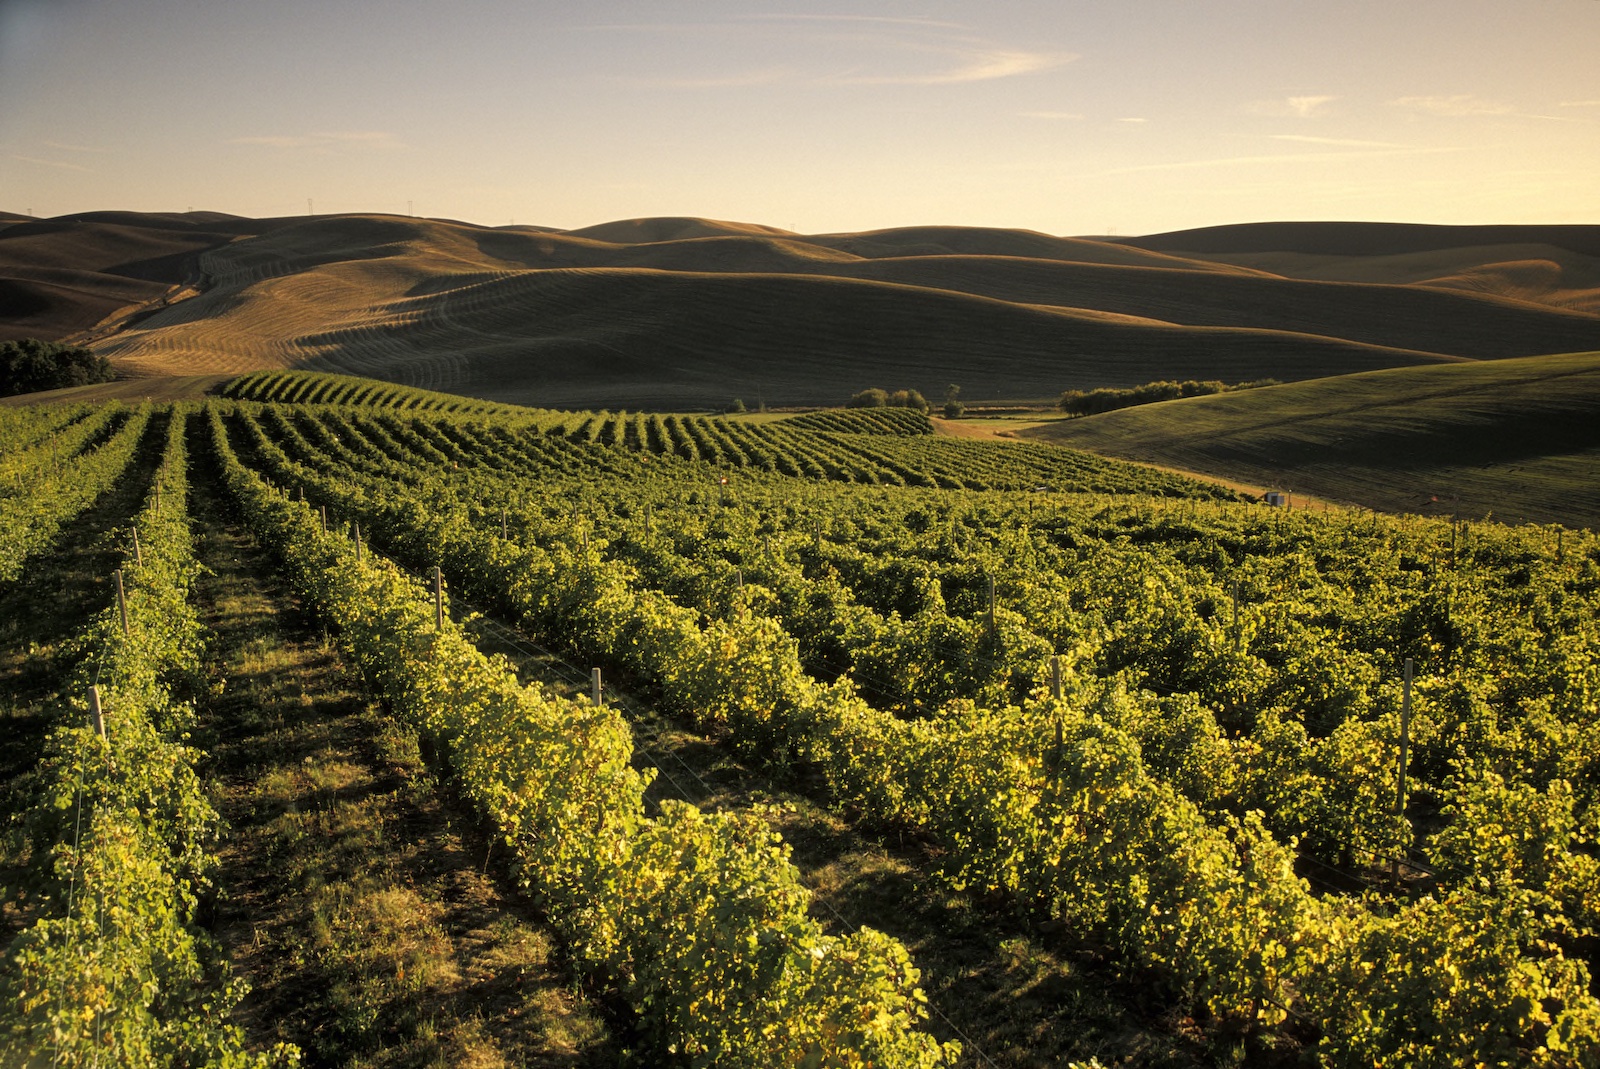 Rows of wine grapes at Spring Valley Vineyard, with rolling hills and wheat fields in the distance; Walla Walla region of eastern Washington.